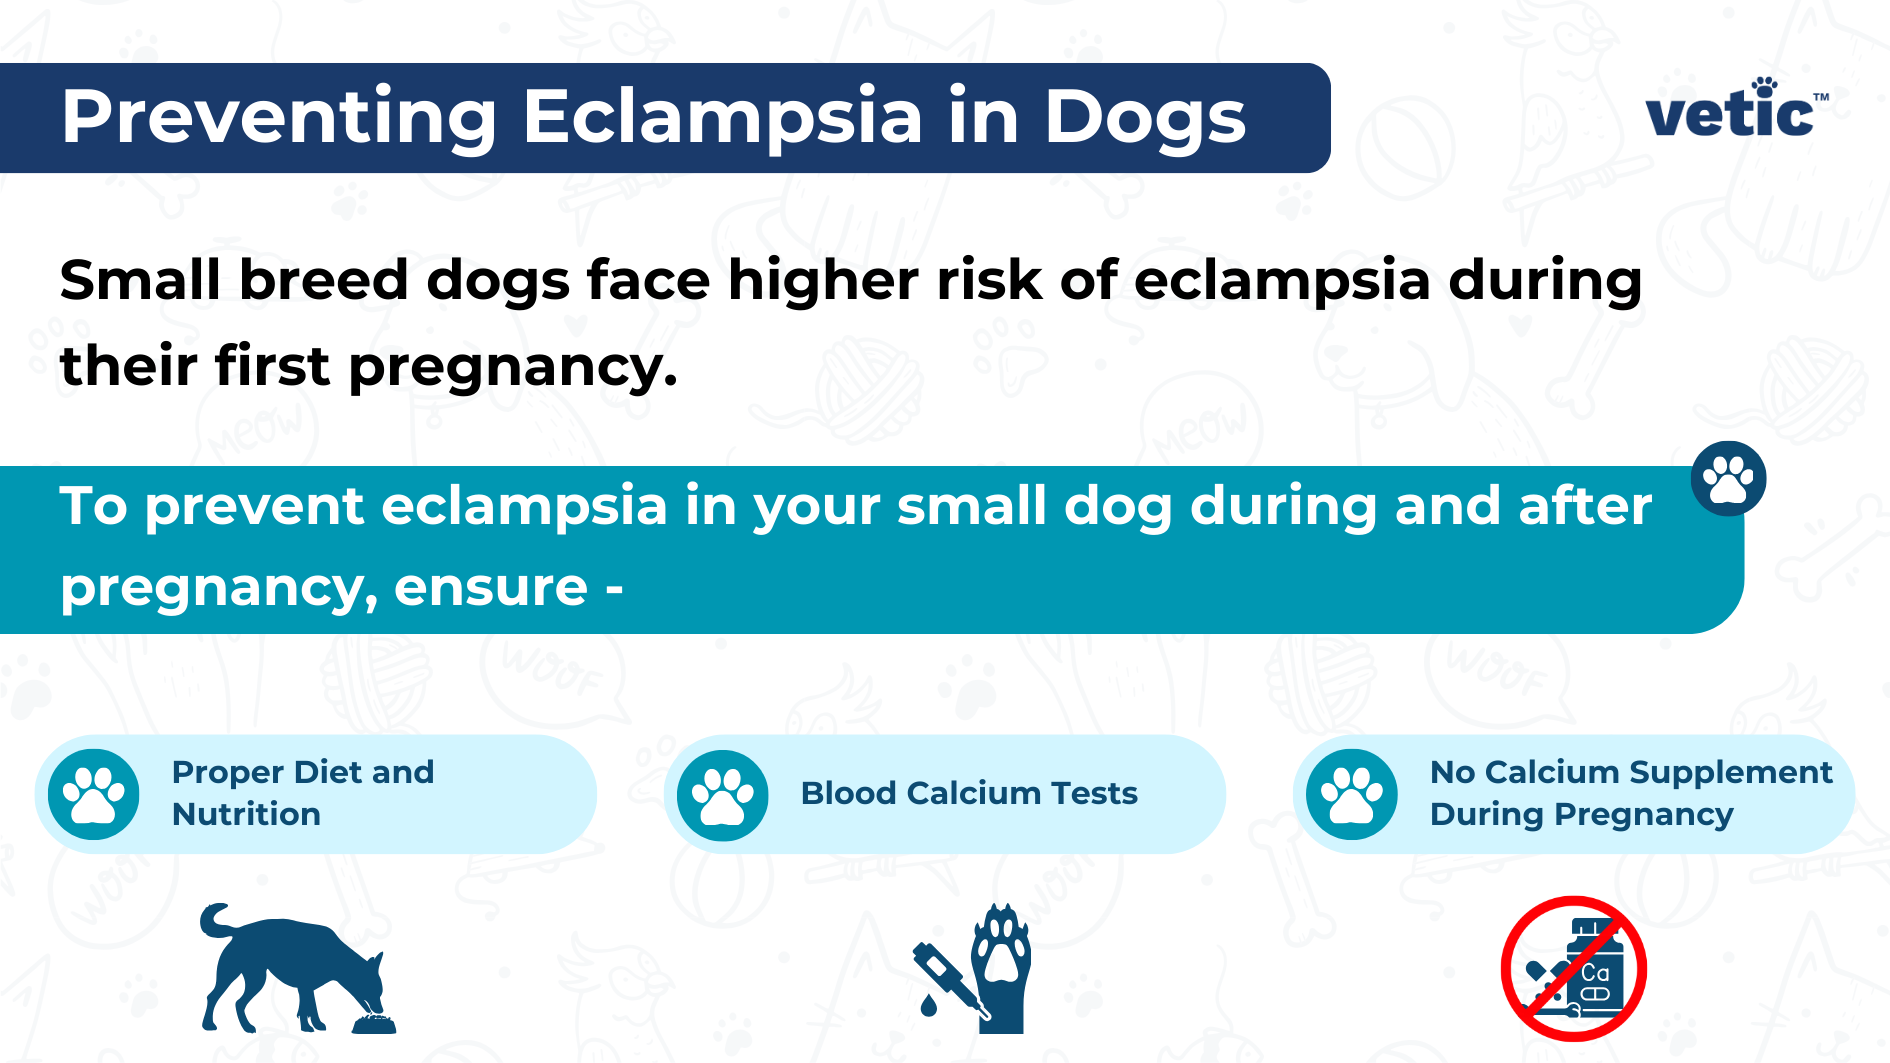 infographic on Preventing Eclampsia in Dogs Small breed dogs face higher risk of eclampsia during their first pregnancy. To prevent eclampsia in your small dog during and after pregnancy, ensure - Proper Diet and Nutrition No Calcium Supplement During Pregnancy Blood Calcium Tests